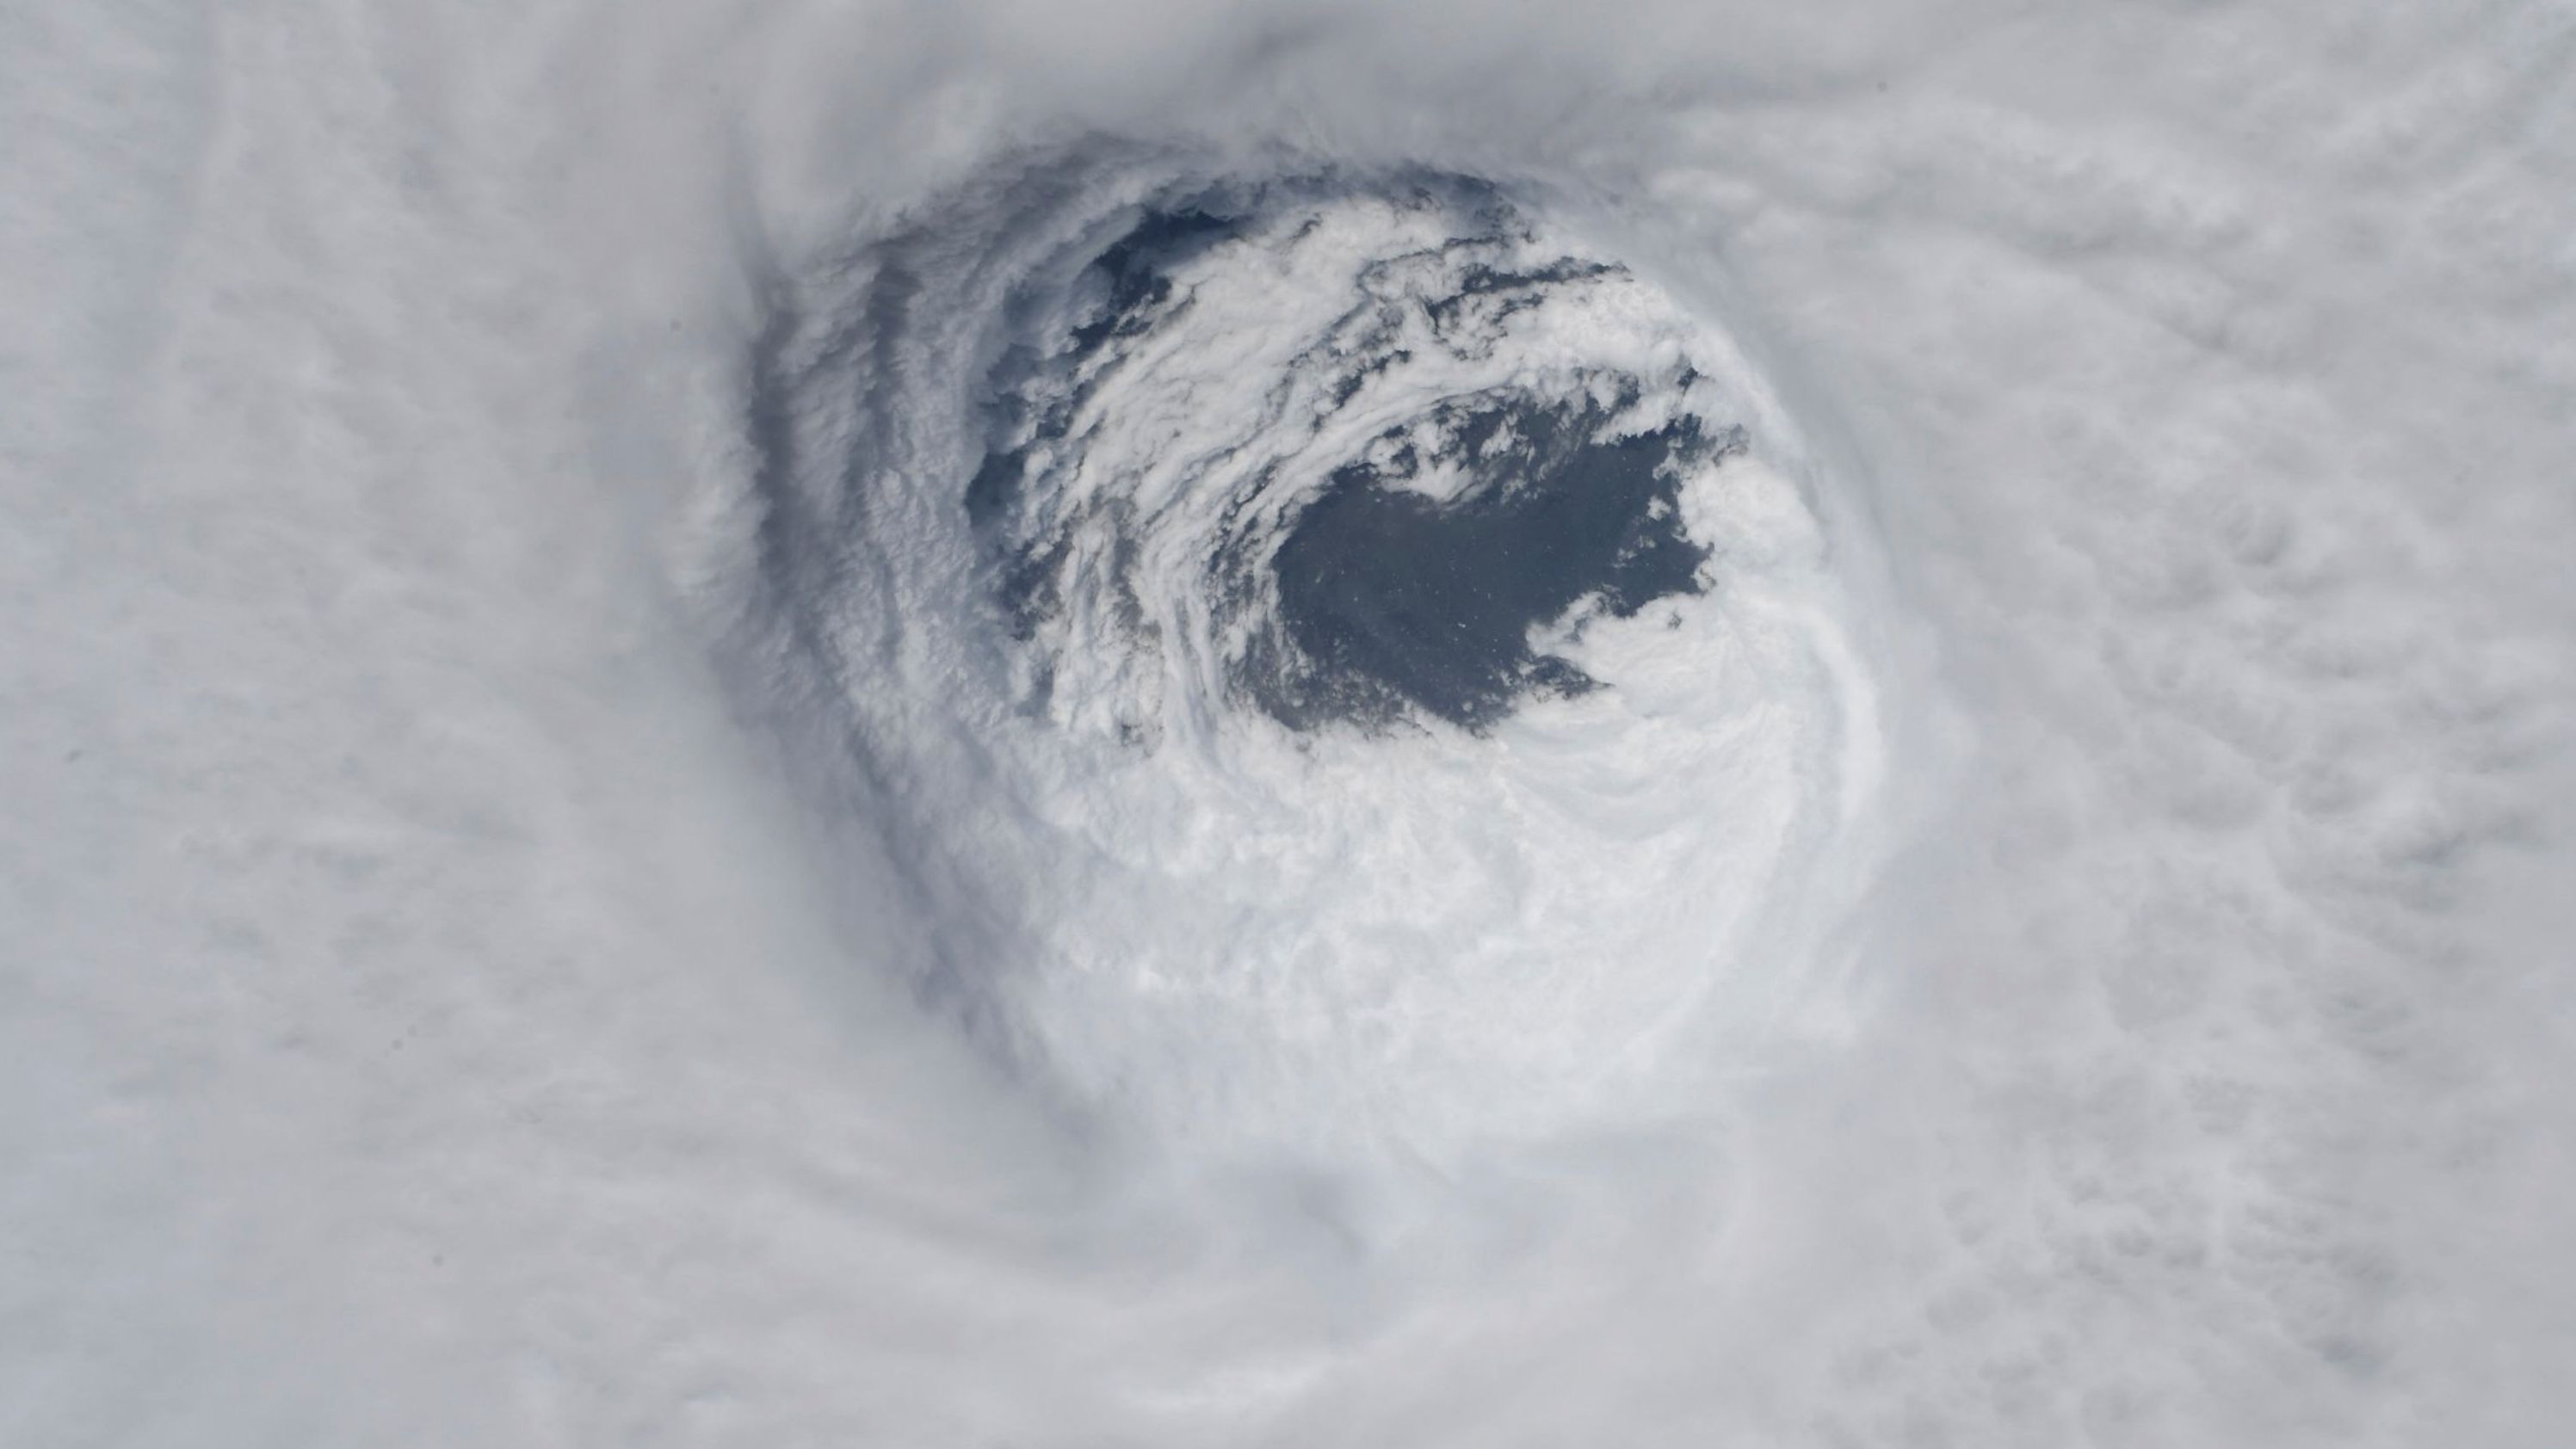 The eye of the storm, as seen from the International Space Station on October 10.